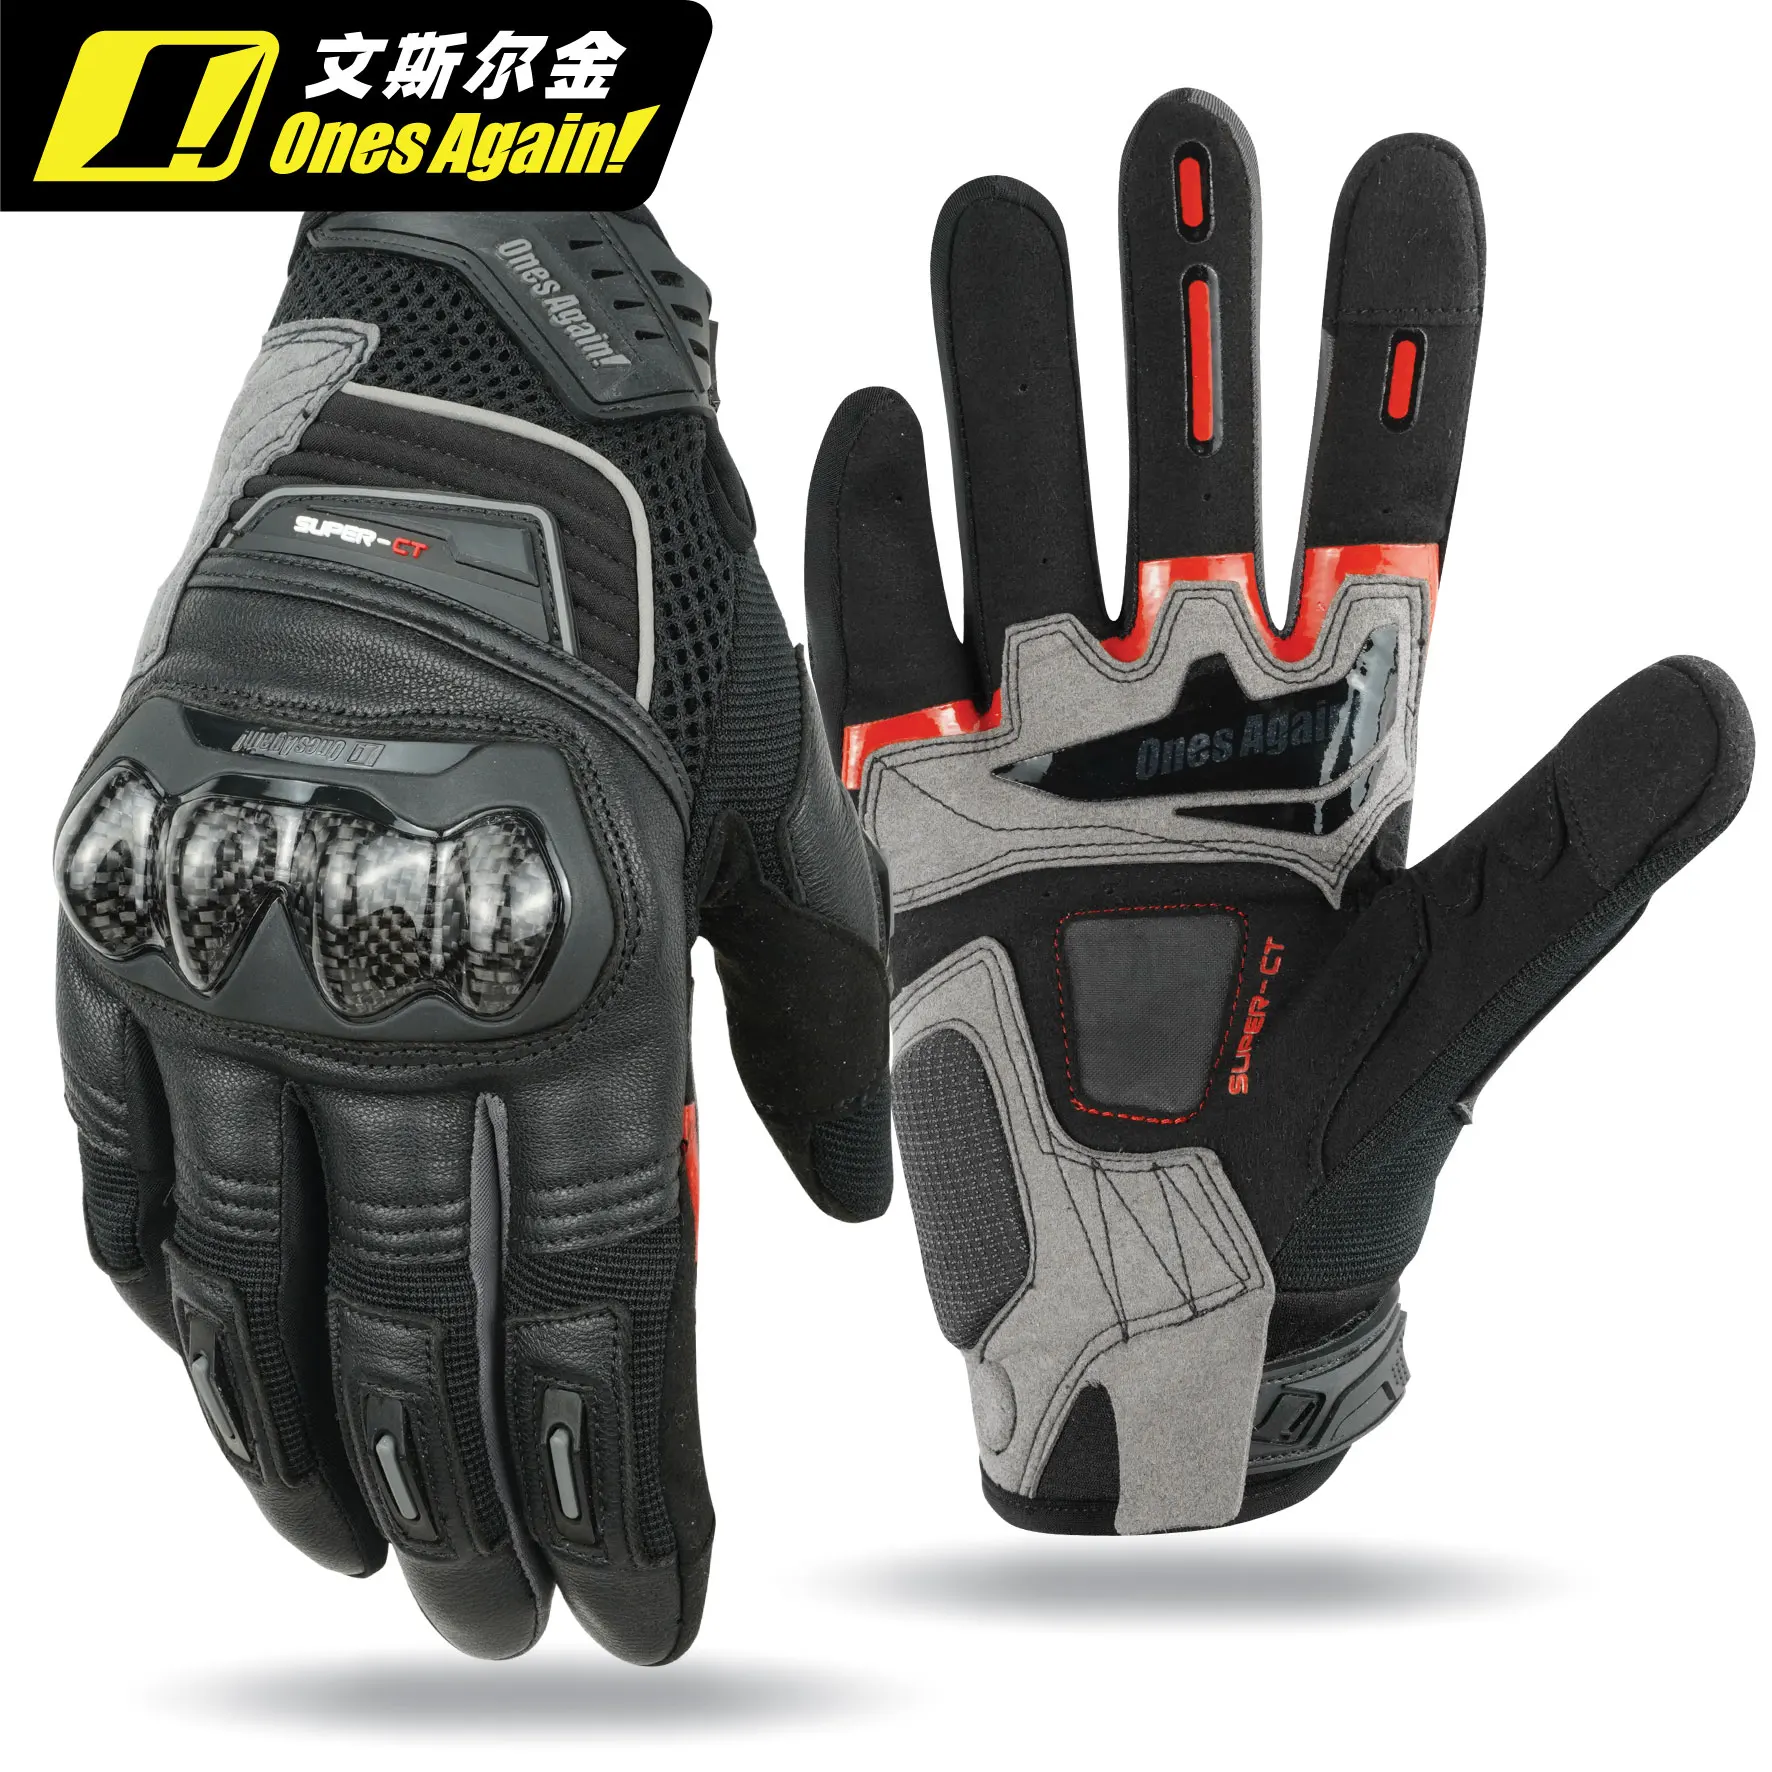 Torcycle gloves touch screen ventilated breathe top cowhide motocross motorcycle gloves thumb200